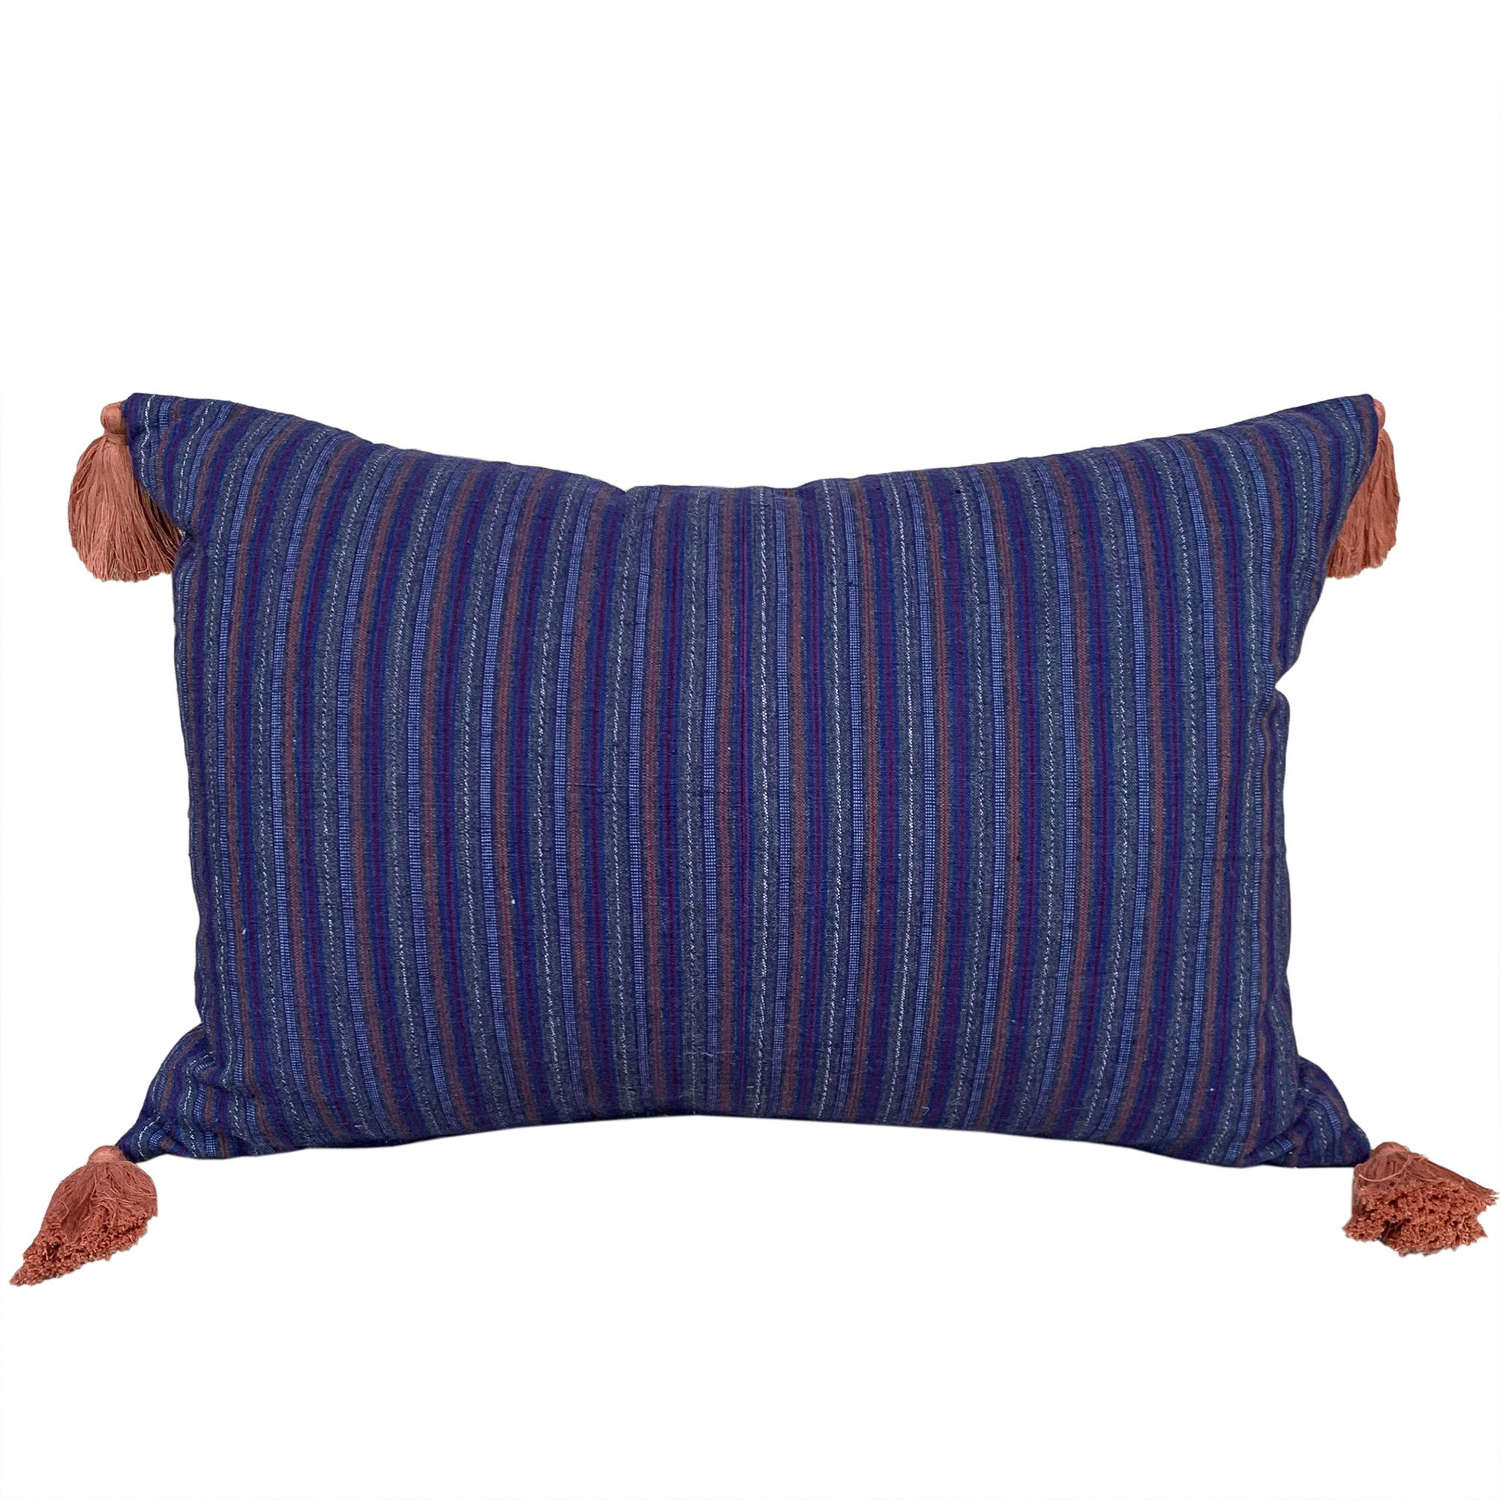 Songjiang cushions with tassels